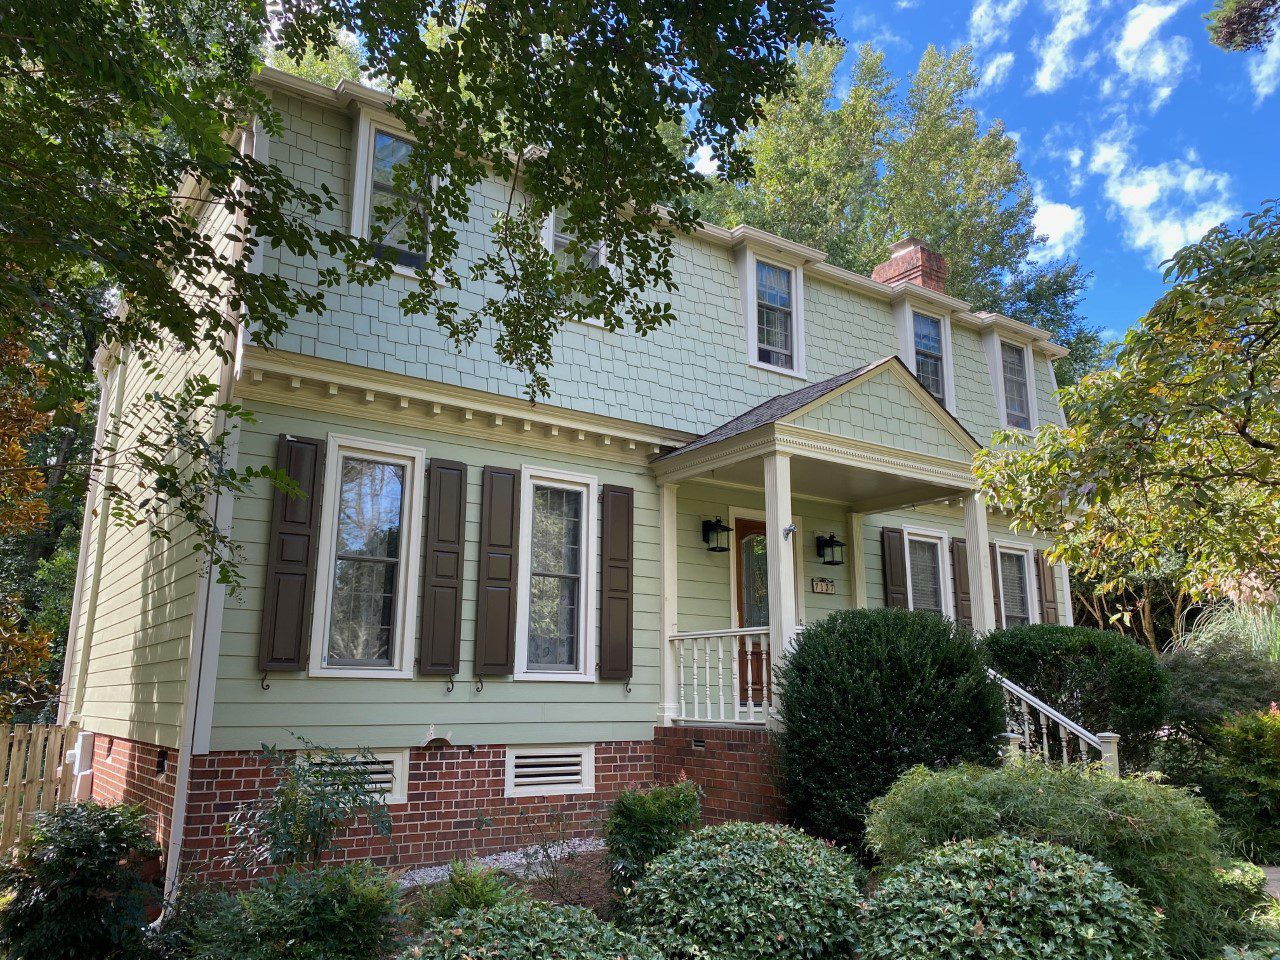 South Charlotte HardiePlank shake siding contractor